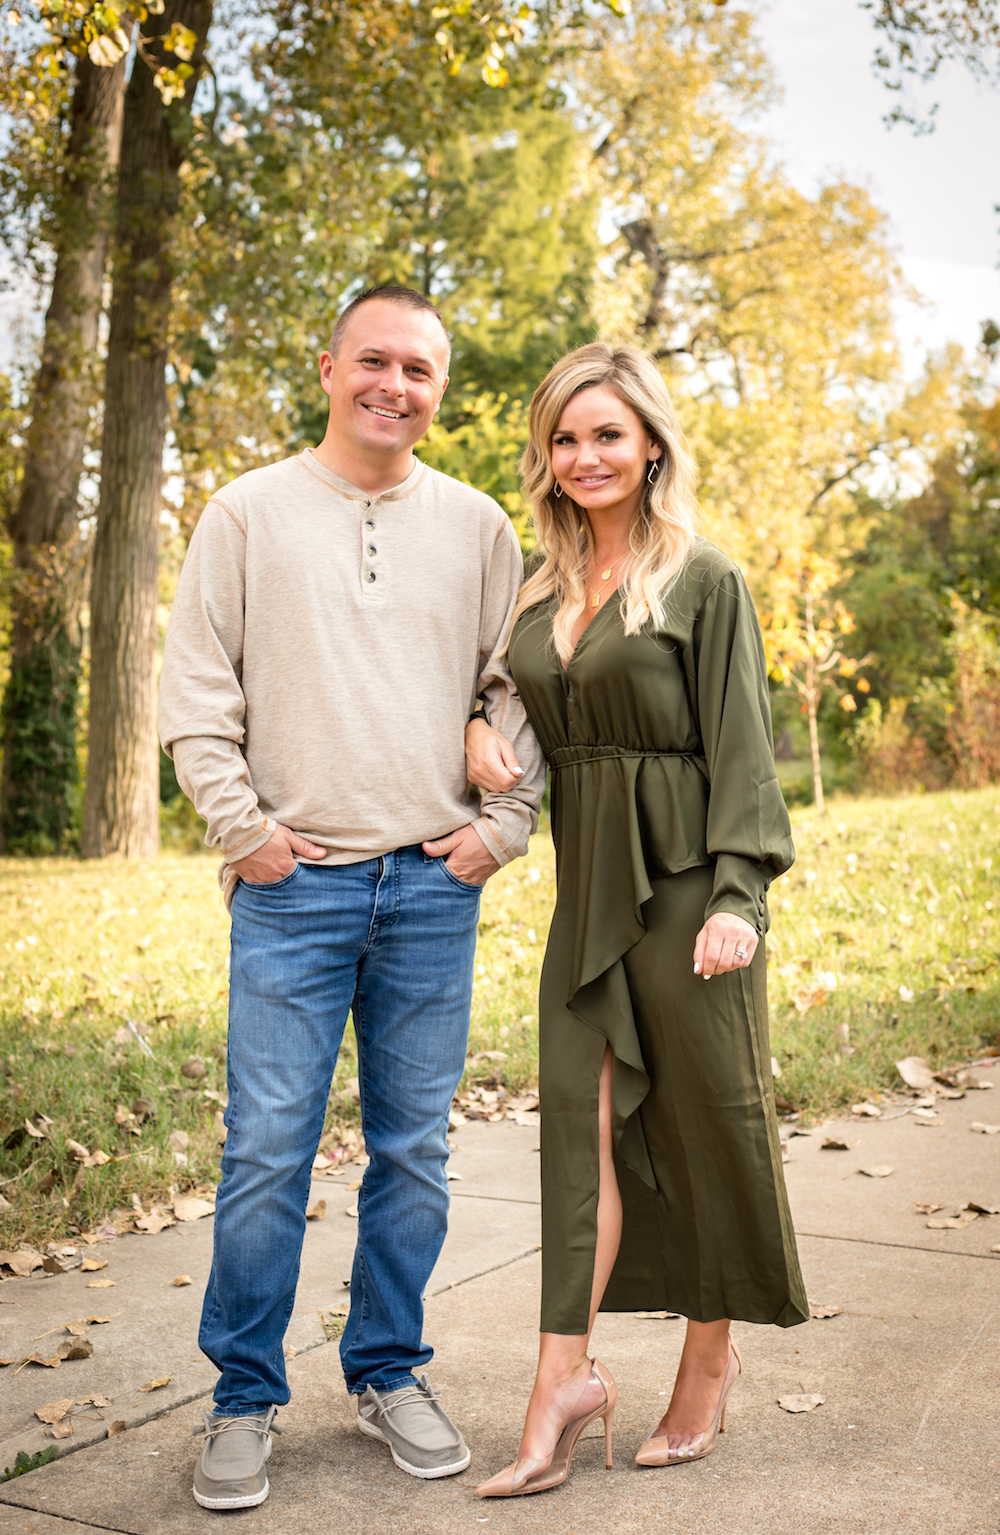 5 Tips For Choosing Outfits For Fall Family Photos. 